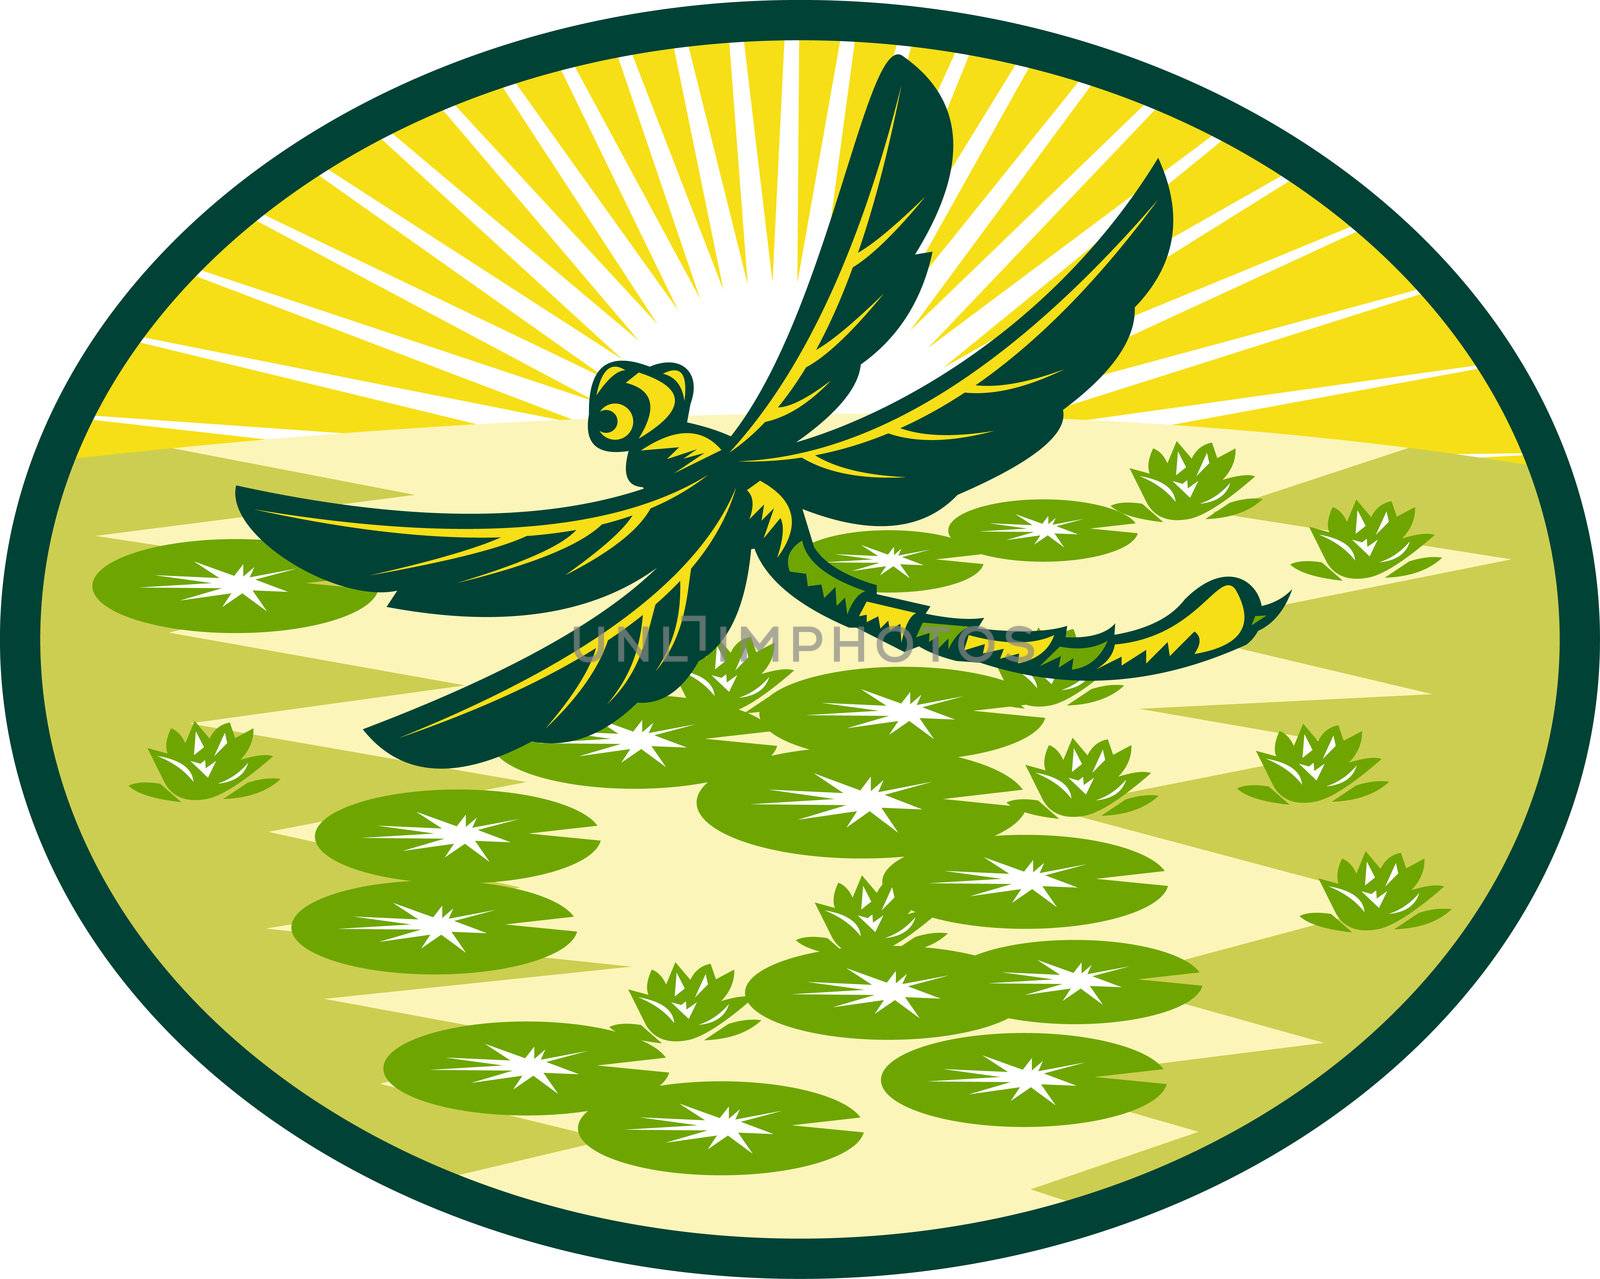 illustration of a dragonfly flying with lily pads and sunburst in background set inside an oval done in retro woodcut style.